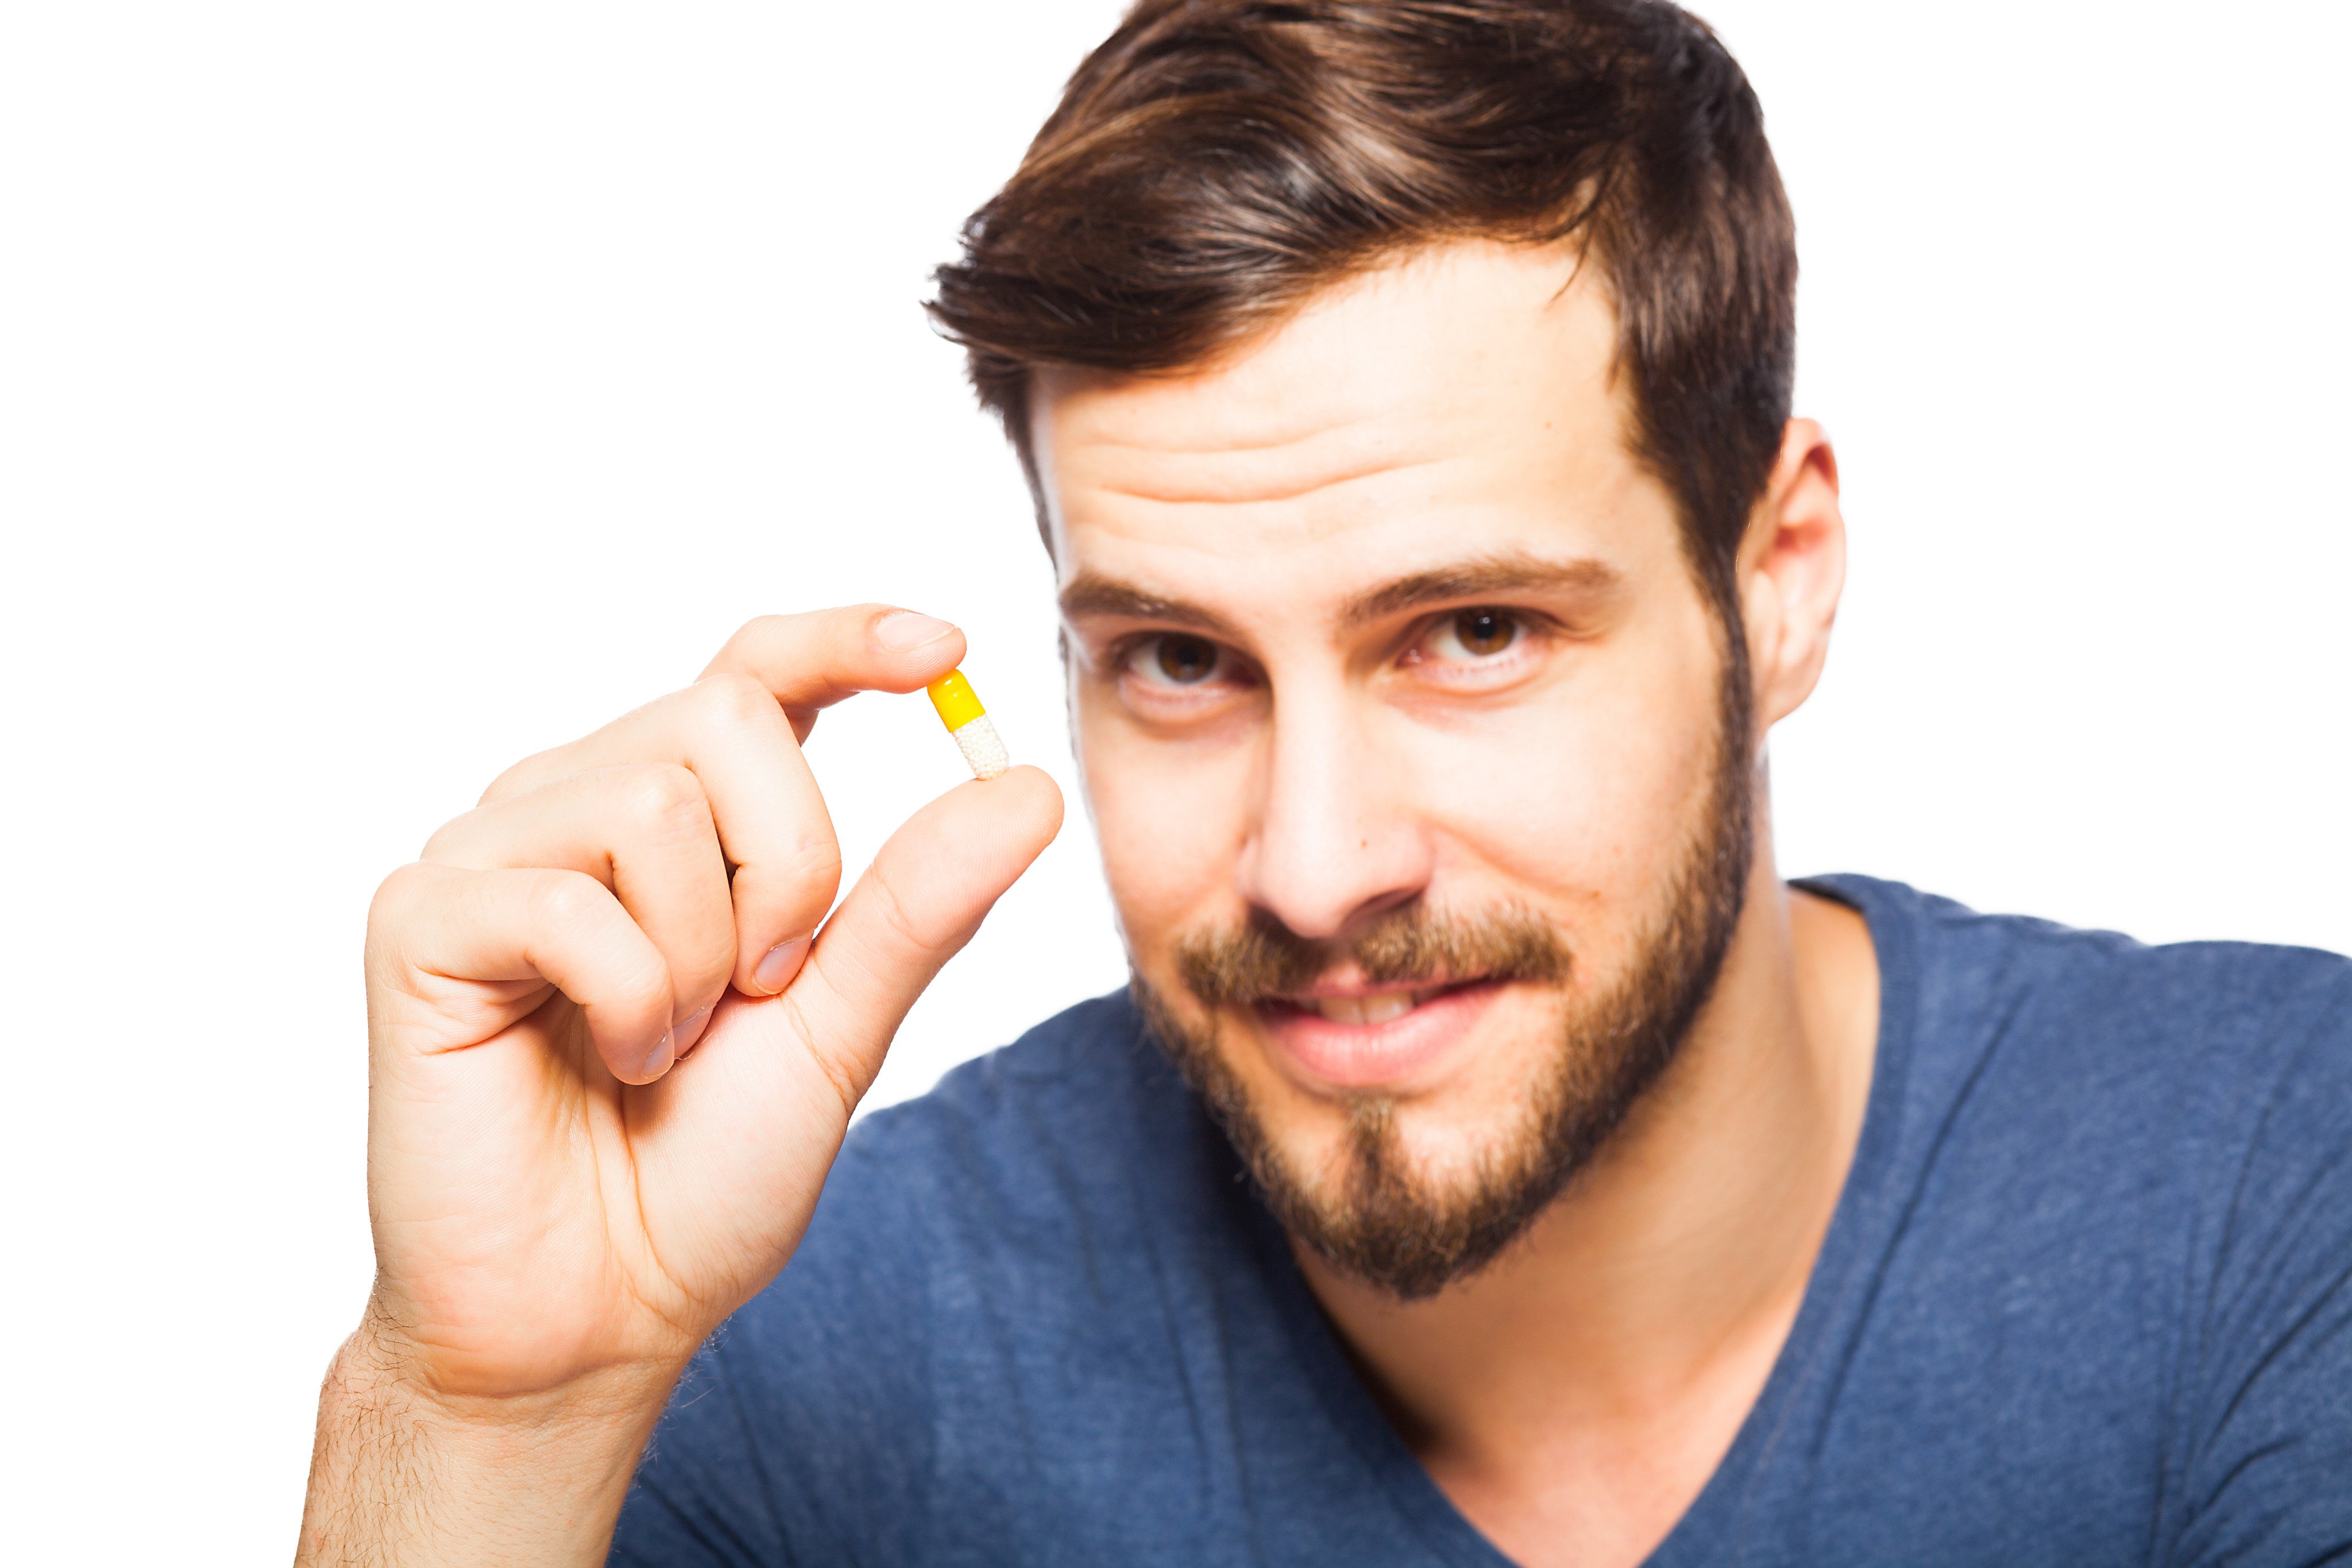 Promising research into male contraception for men may soon result in an oral drug.
Photo: Shutterstock